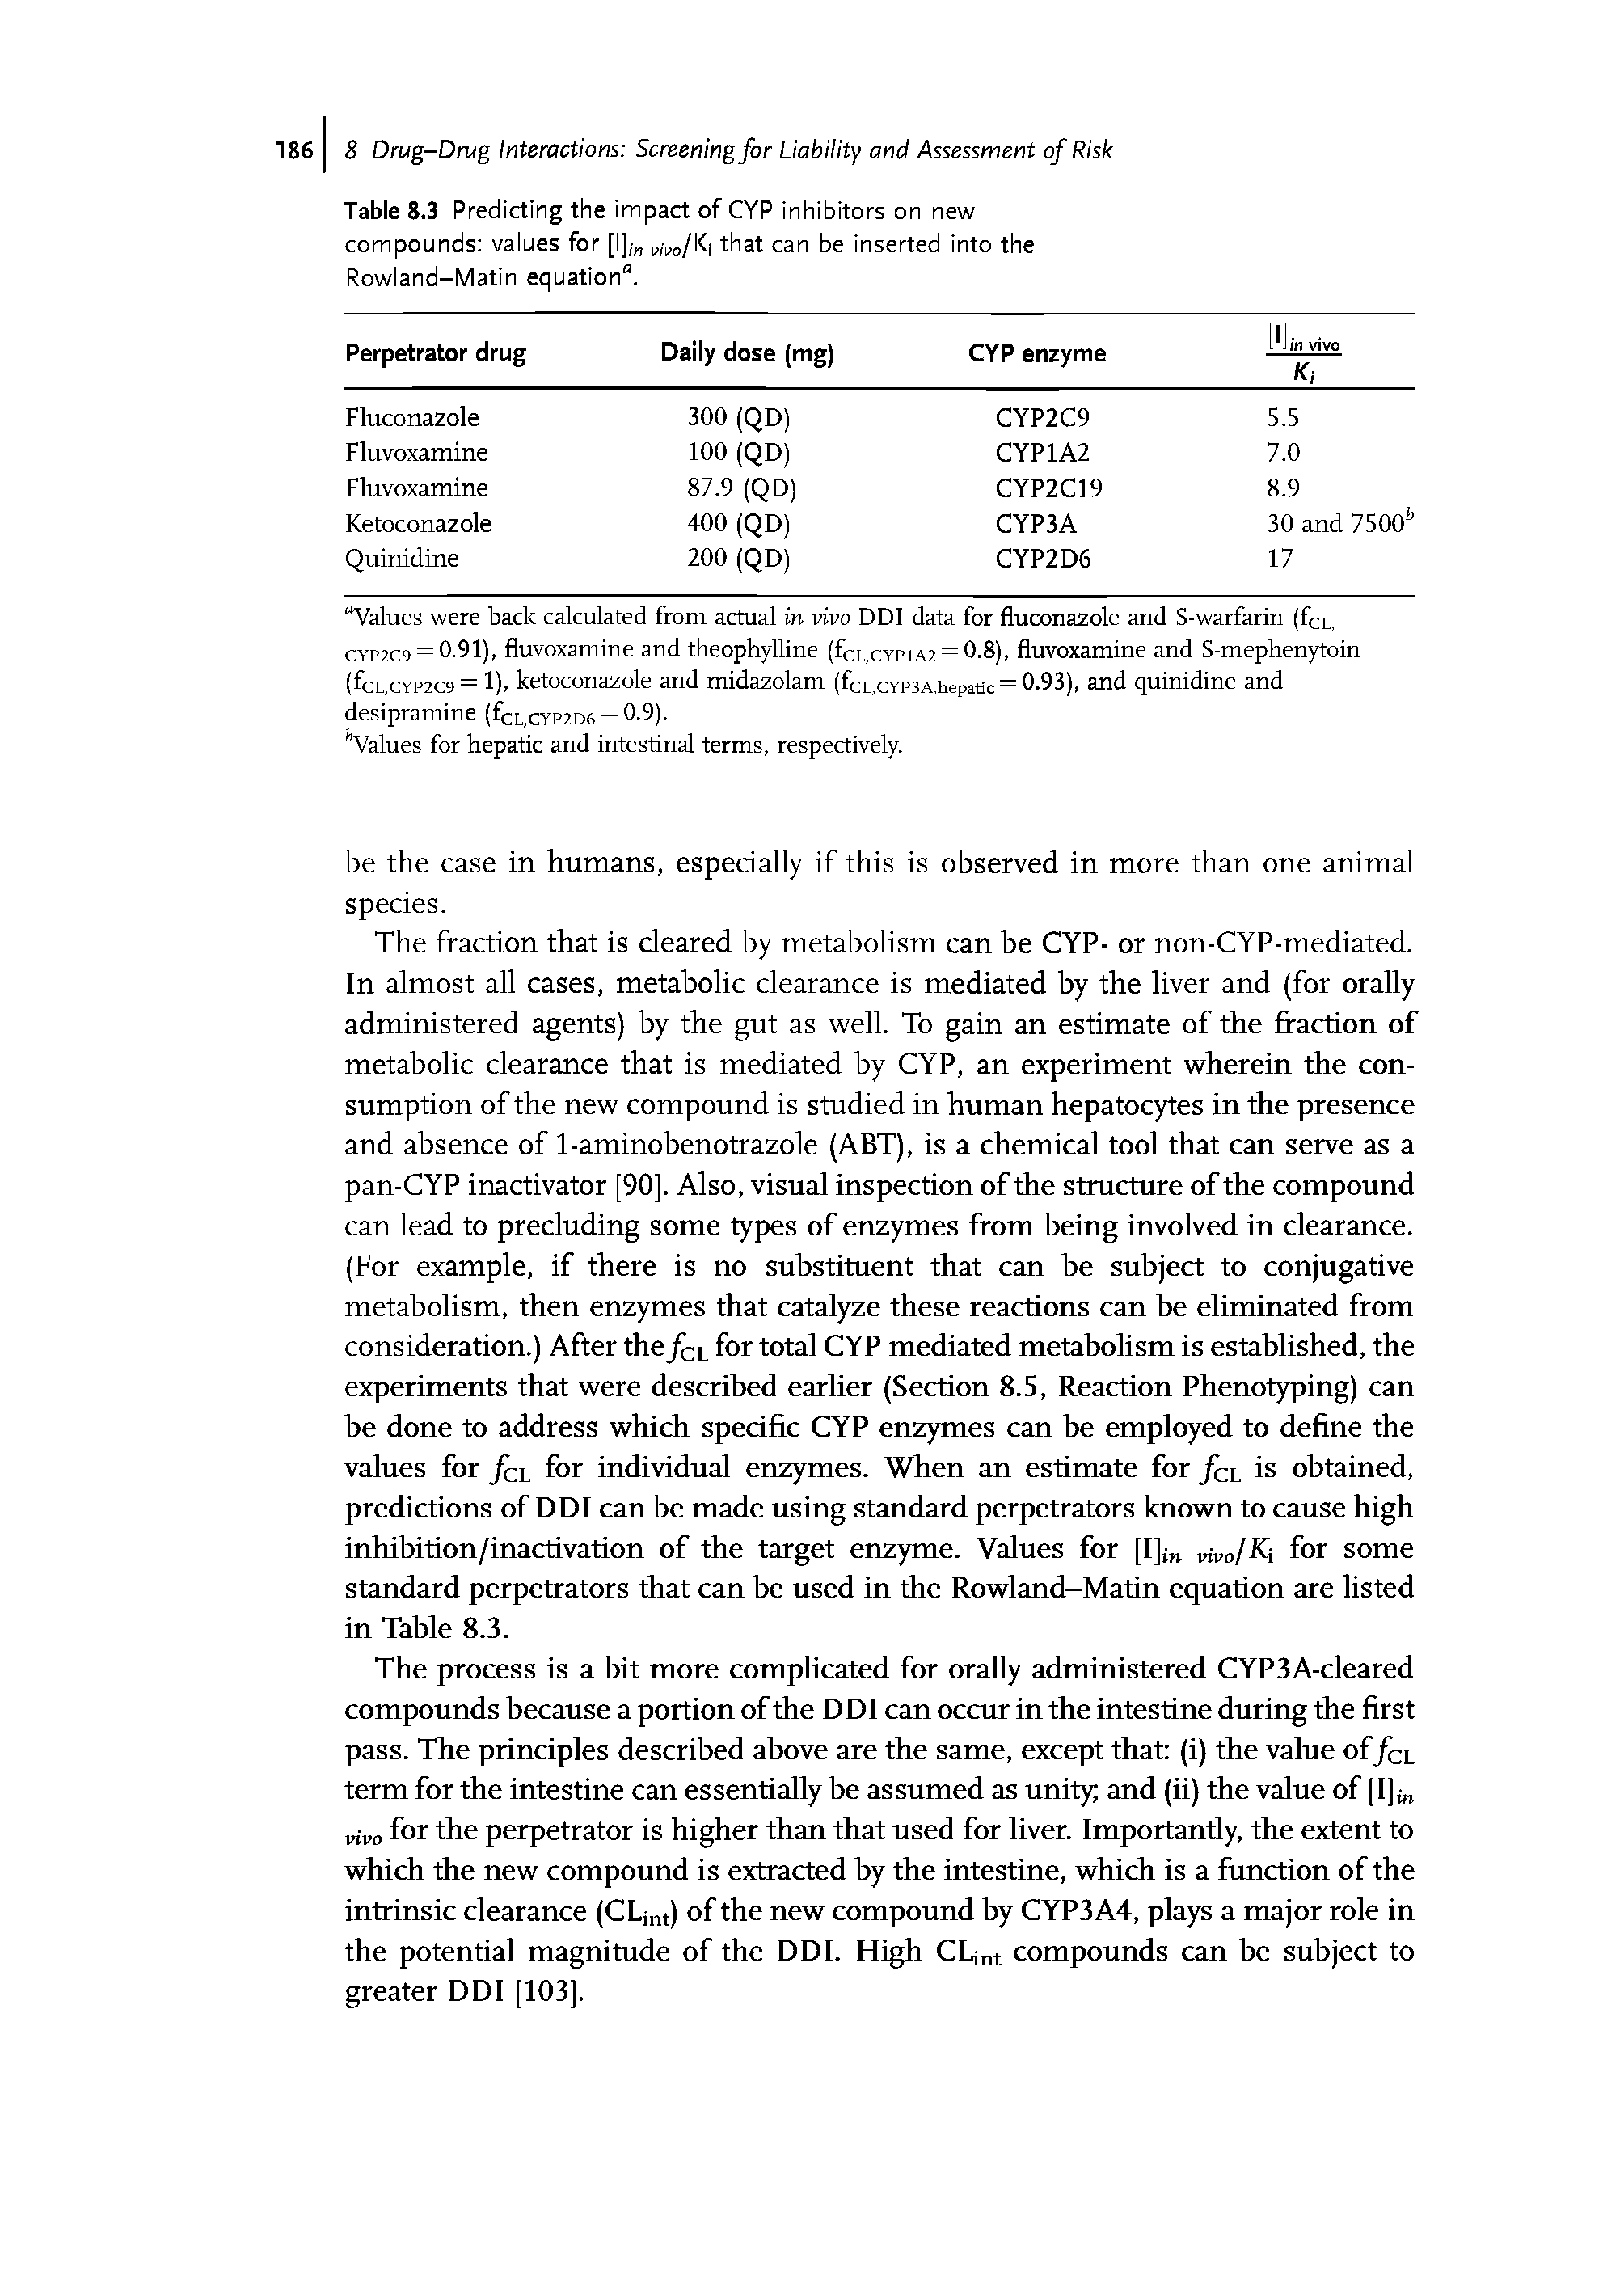 Table 8.3 Predicting the impact of CYP inhibitors on new compounds values for [l], vo/Ki that can be inserted into the Rowland-Matin equation".